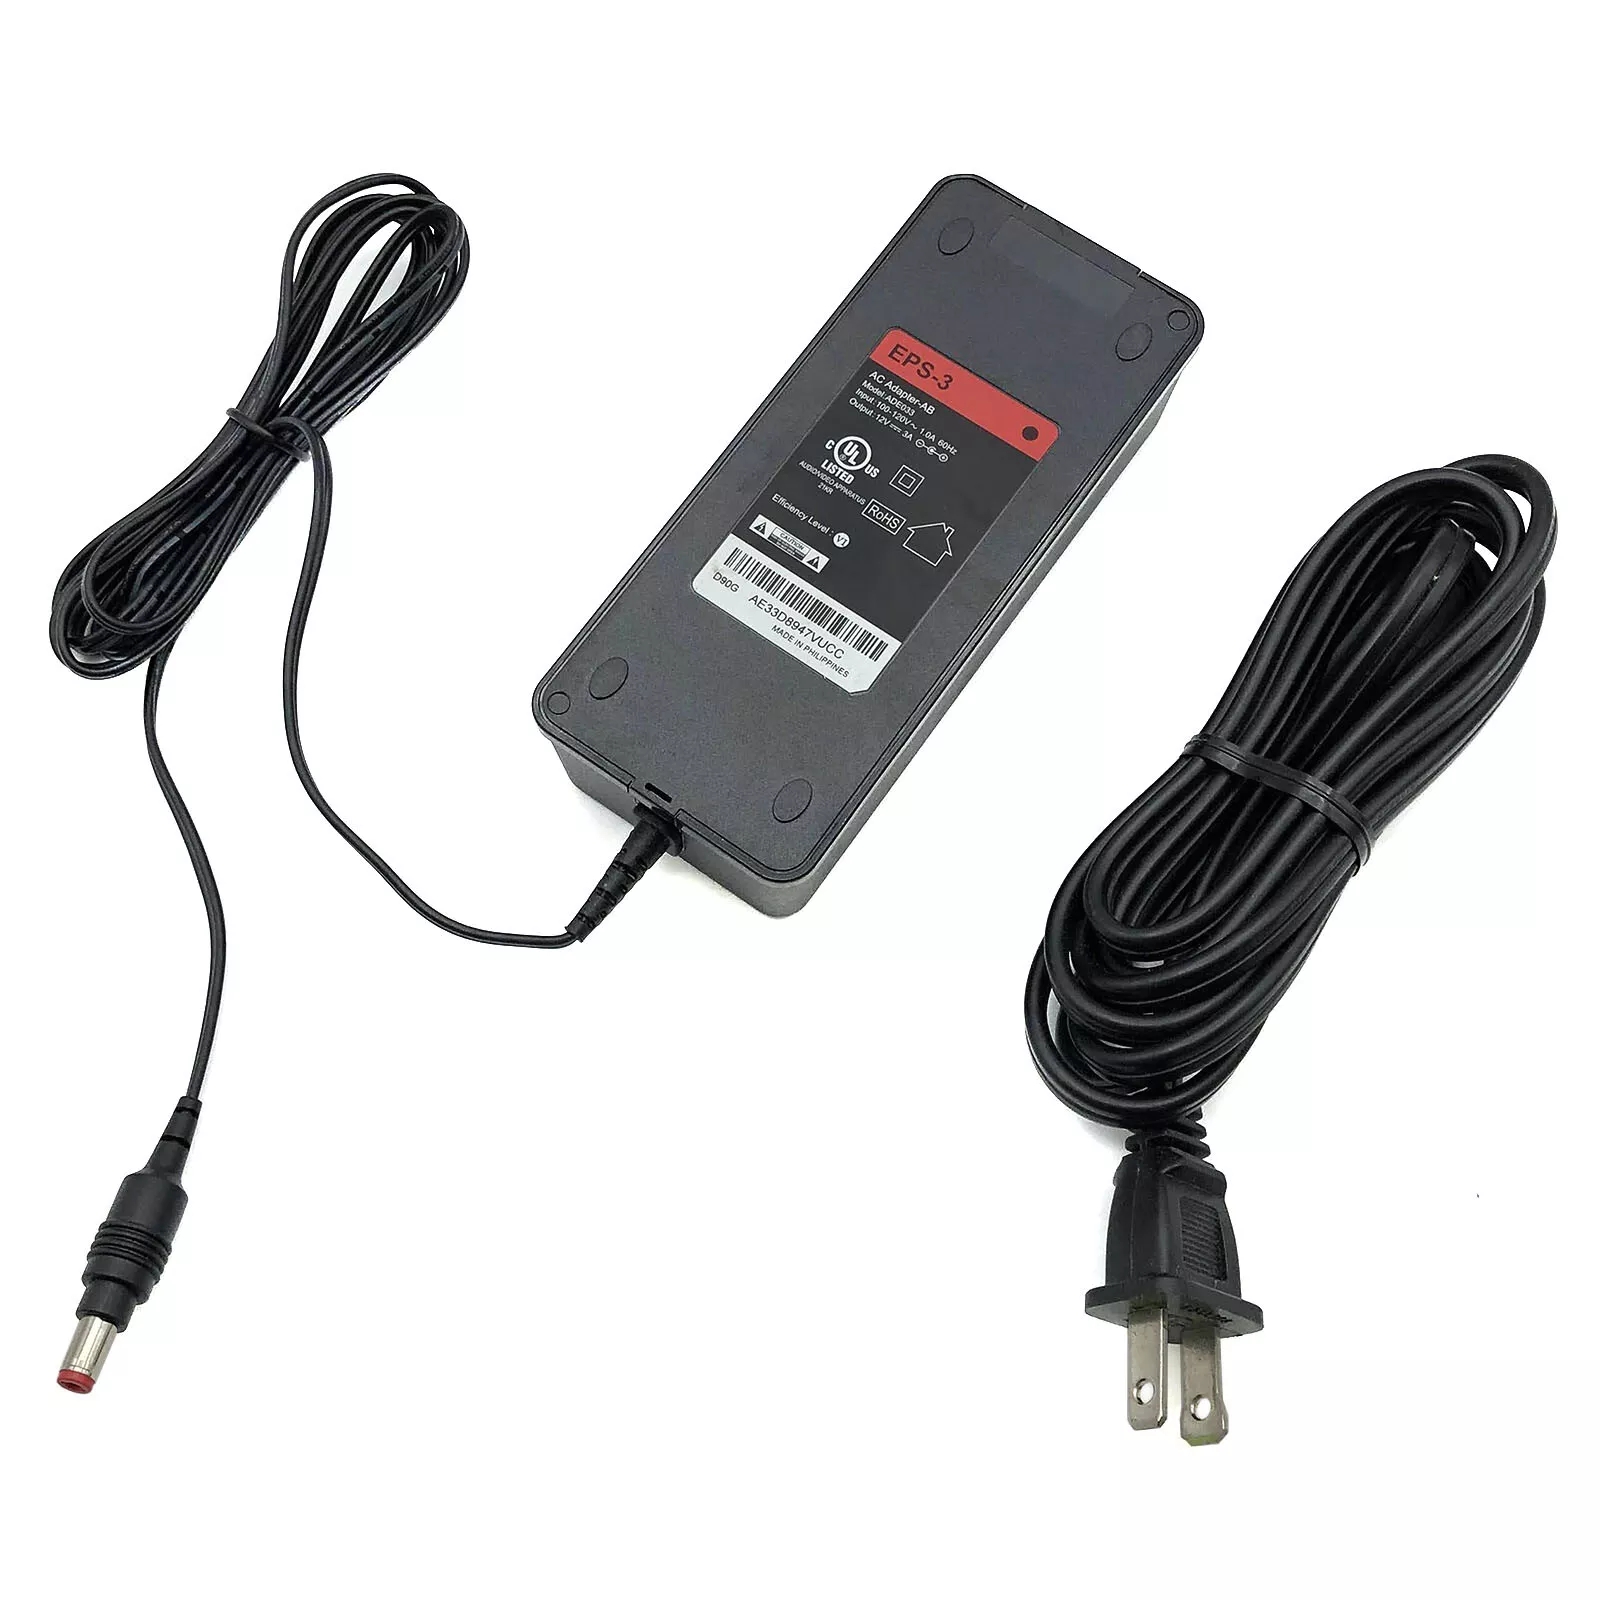 *Brand NEW*Genuine 36W AcBel 12V 3A AC DC Adapter EPS-3 Model ADE033 w/Cord Power Supply